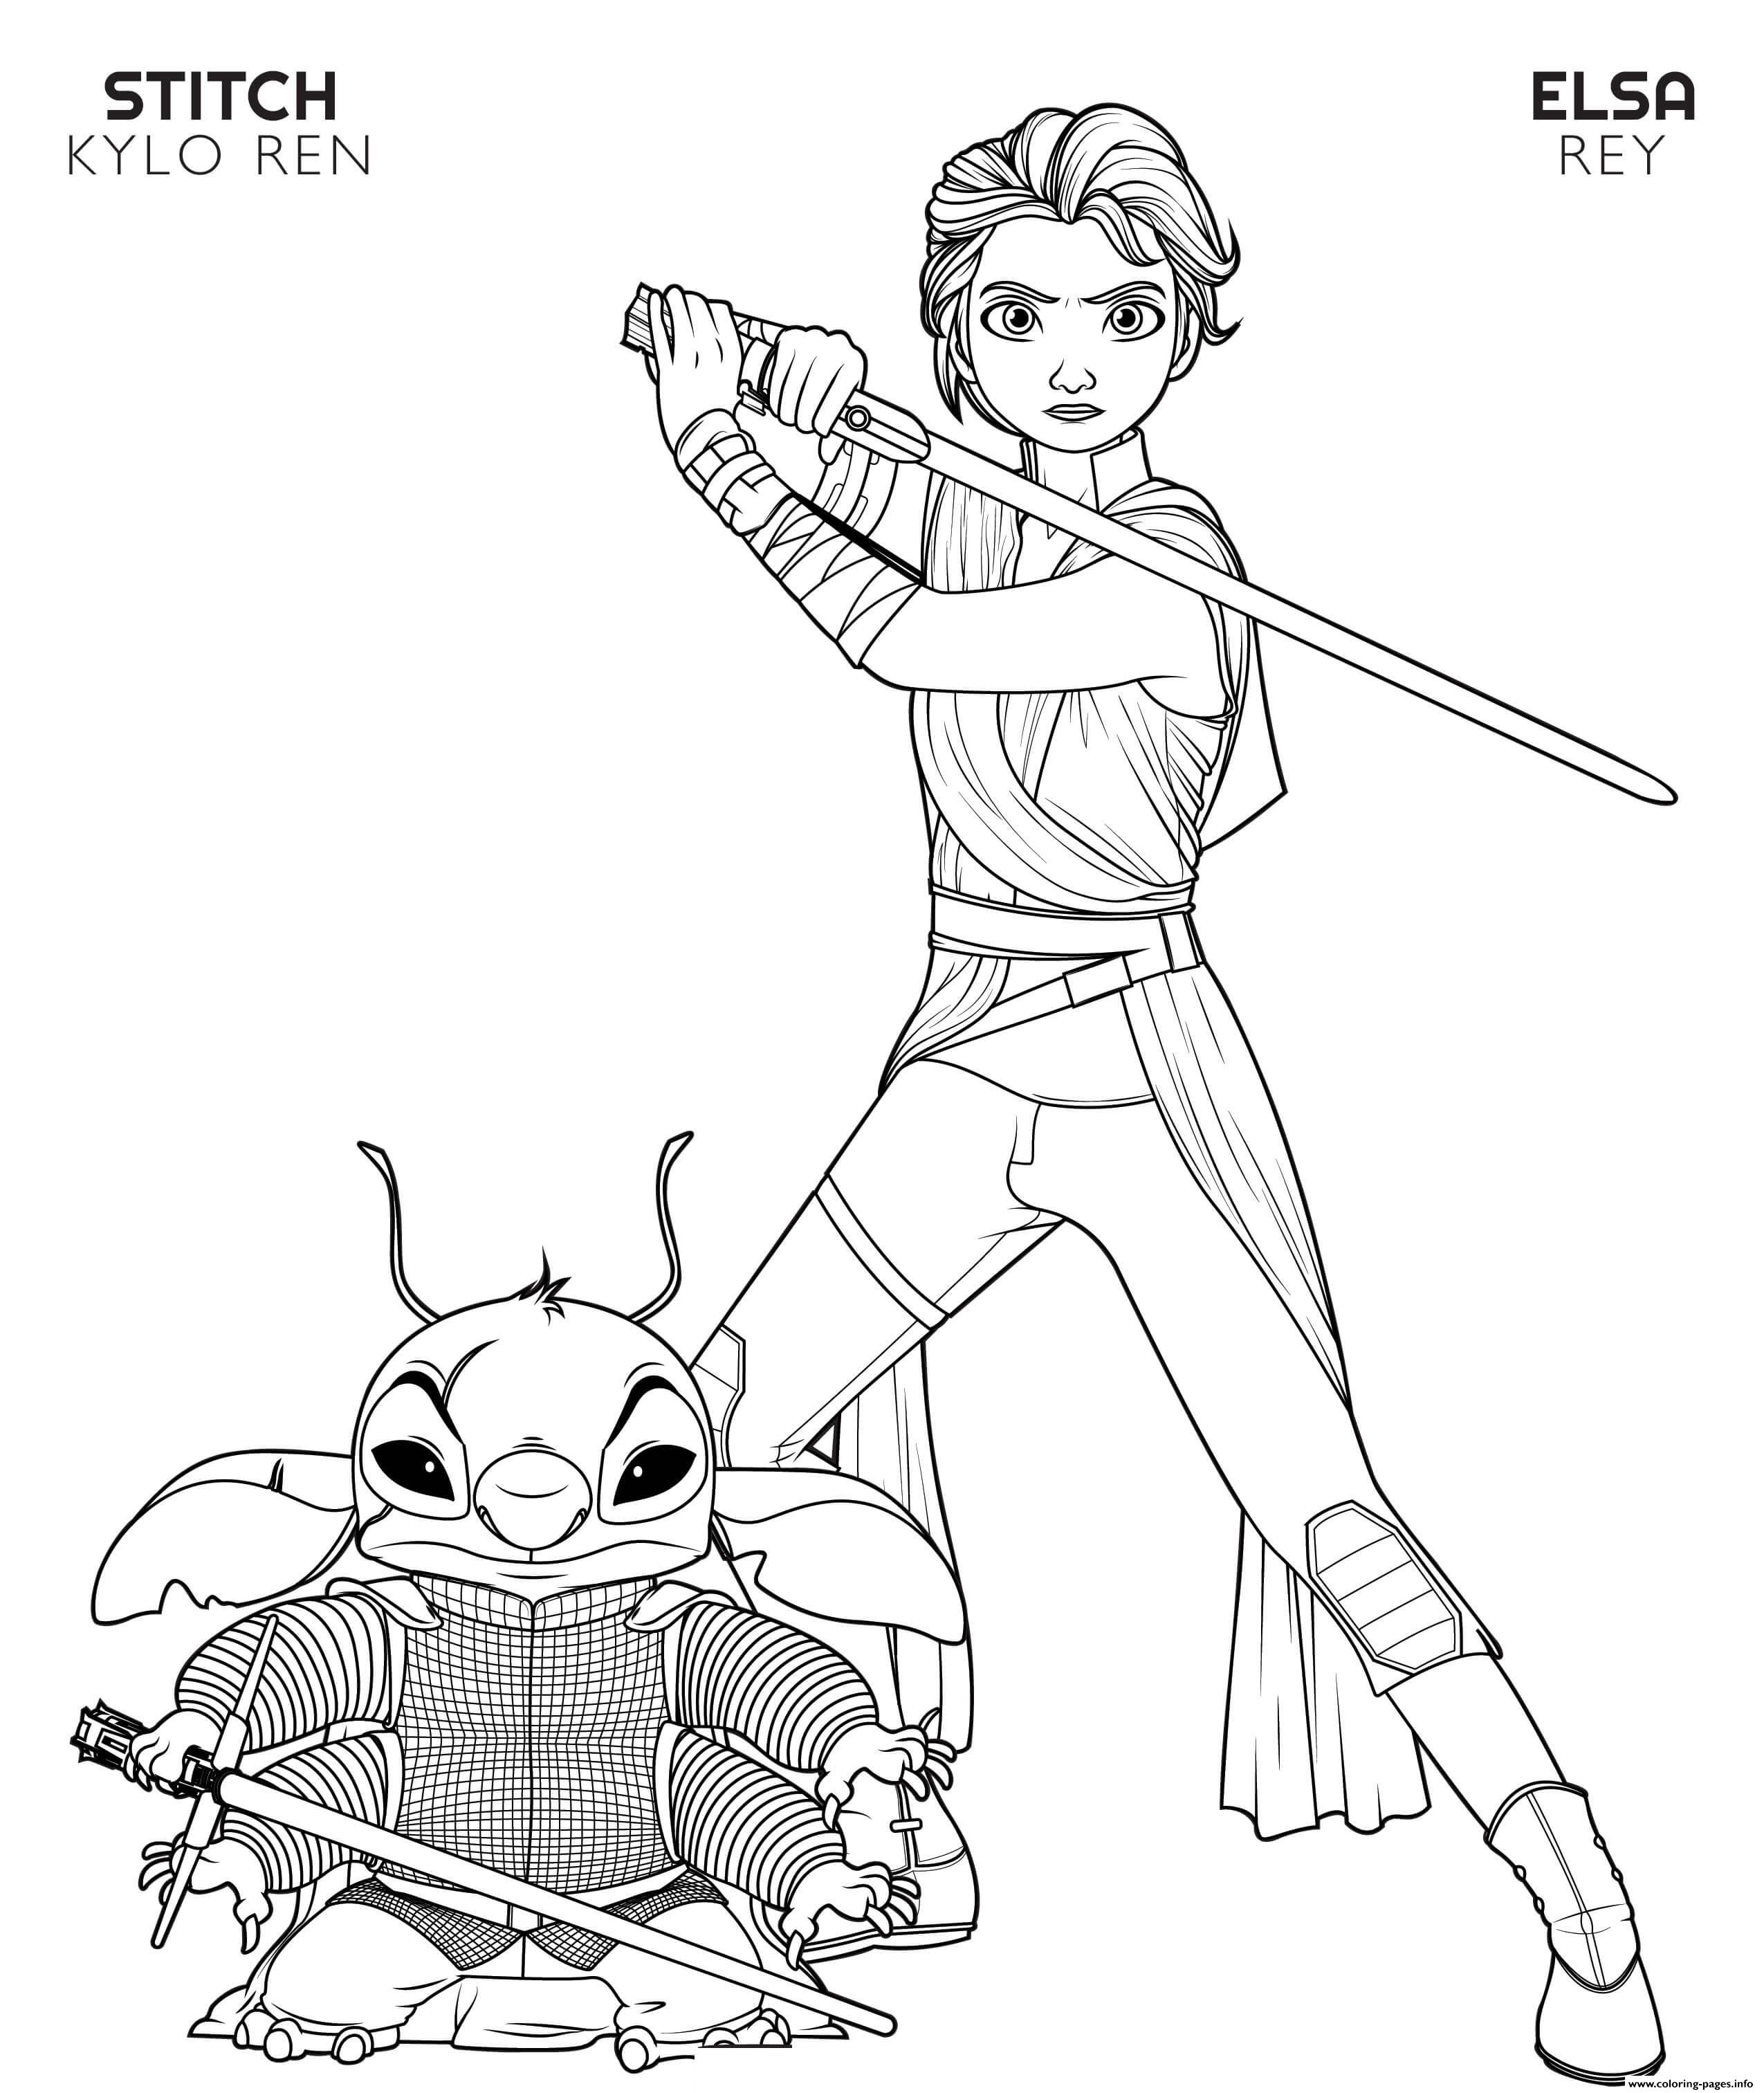 Rey Elsa And Kylo Ren Stitch Disney Star Wars Coloring Pages Printable